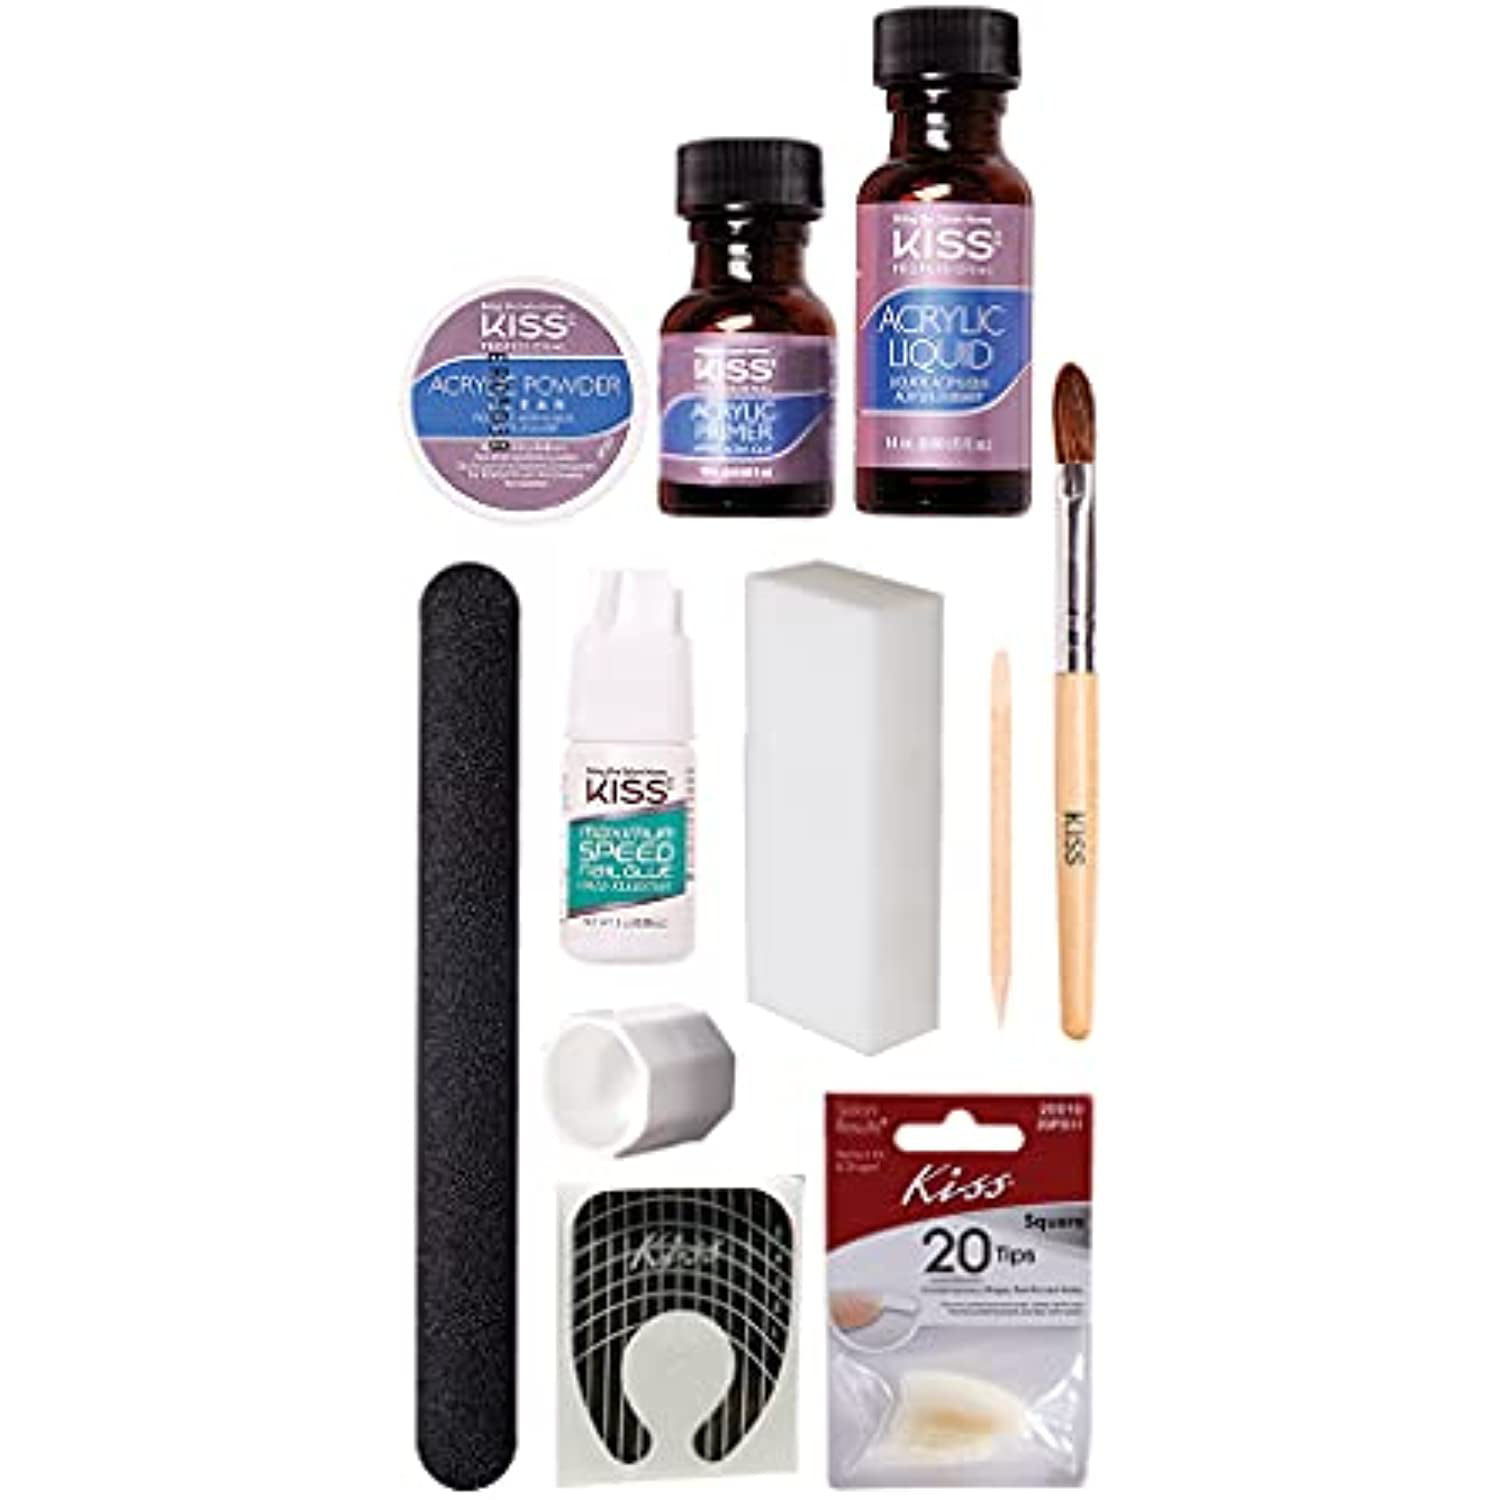 DipWell Easy Acrylic Powder and Gel Resin, Dipping Nail Starter Kit -  Walmart.com